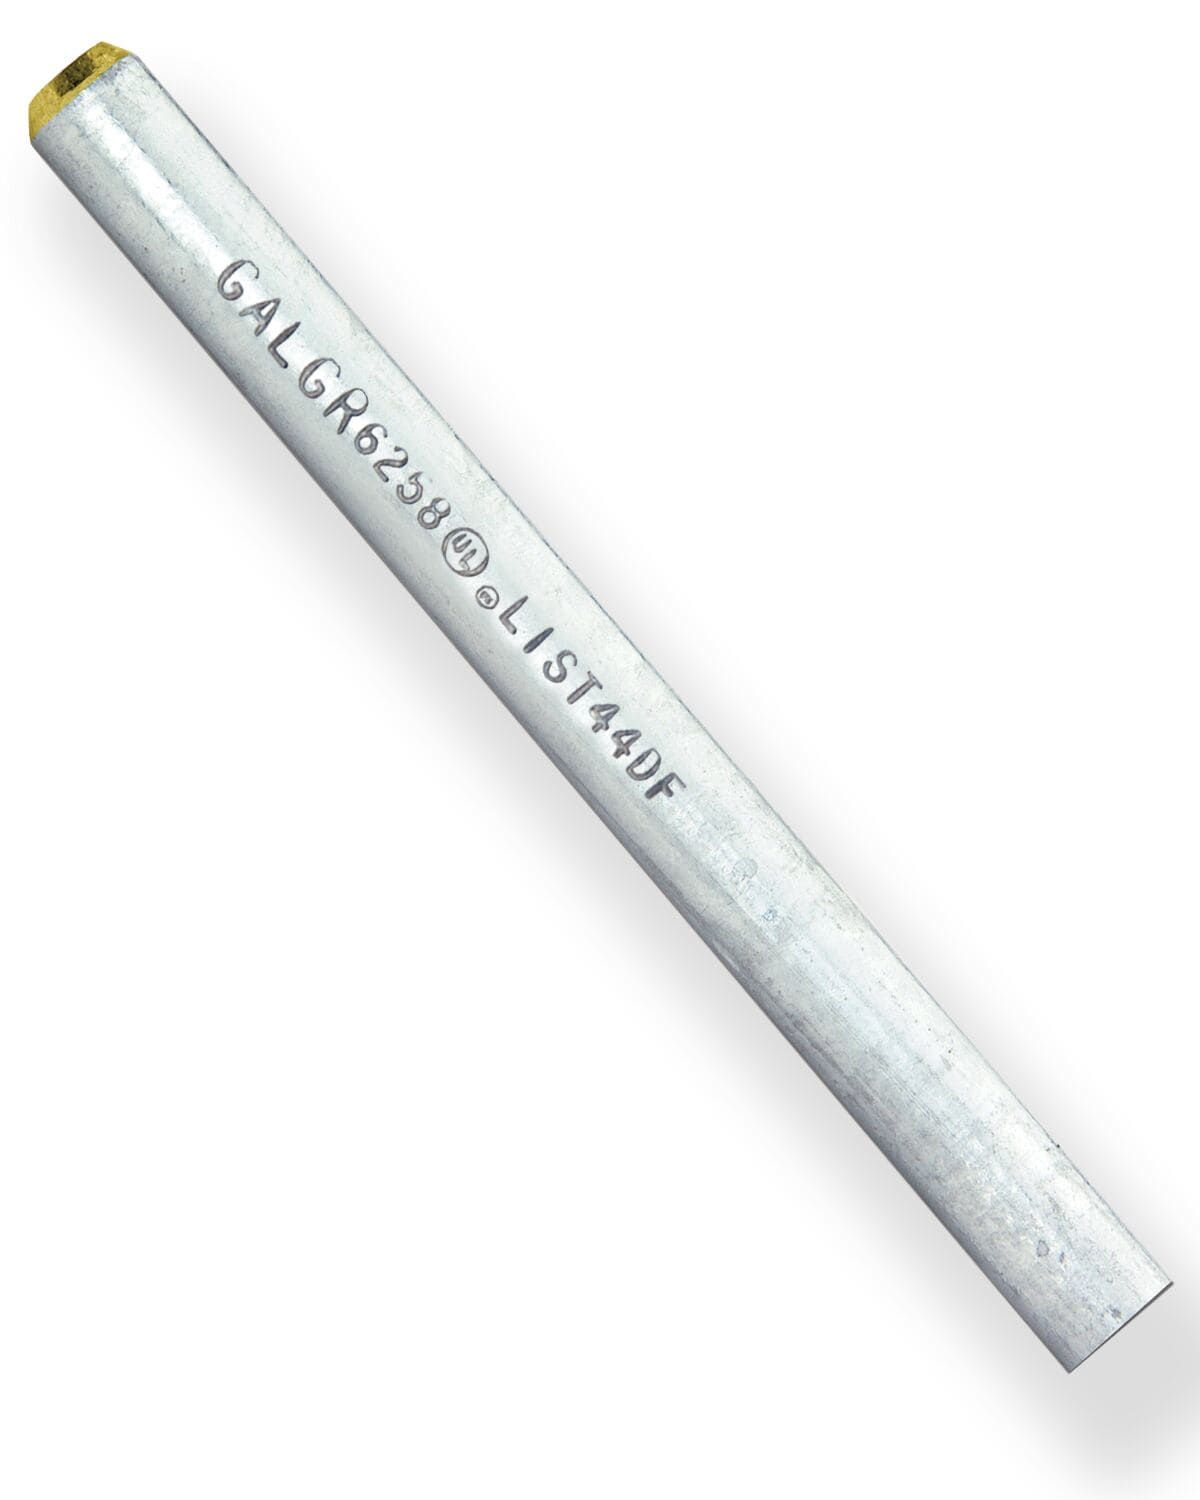 Galvan Grounding Rods, 0.625-in Diameter, 96-in Length, UL Listed, Meets  National Electric Code Requirements in the Grounding Bars department at